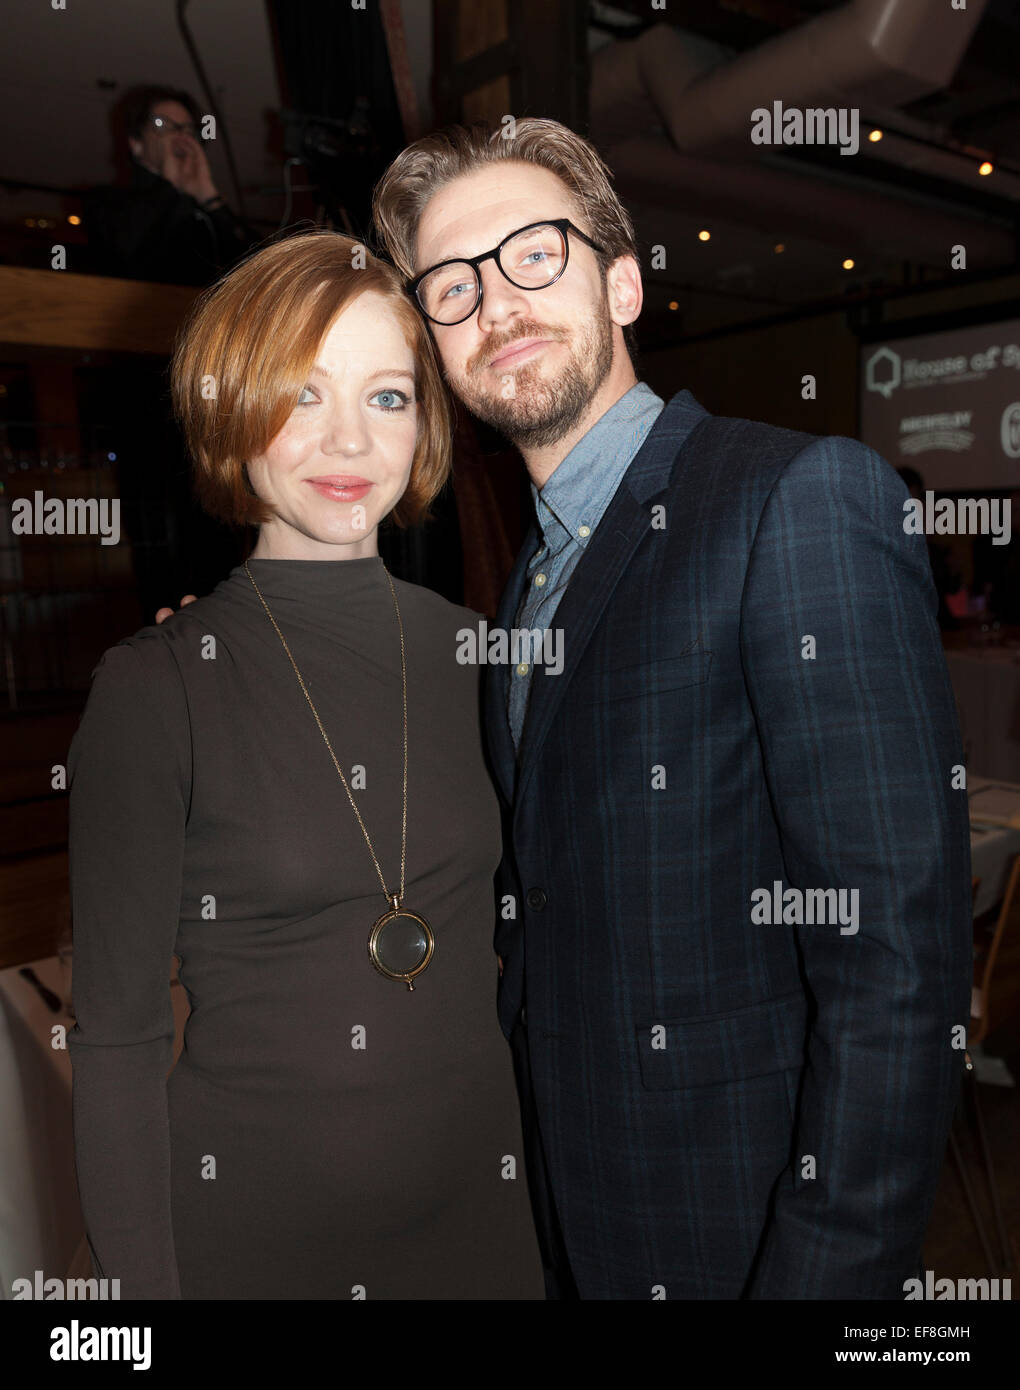 NEW YORK, NY - JANUARY 28, 2014: Dan Stevens and Susie Hariet attend the 2015 House Of SpeakEasy Gala at City Winery in Manhattan Stock Photo